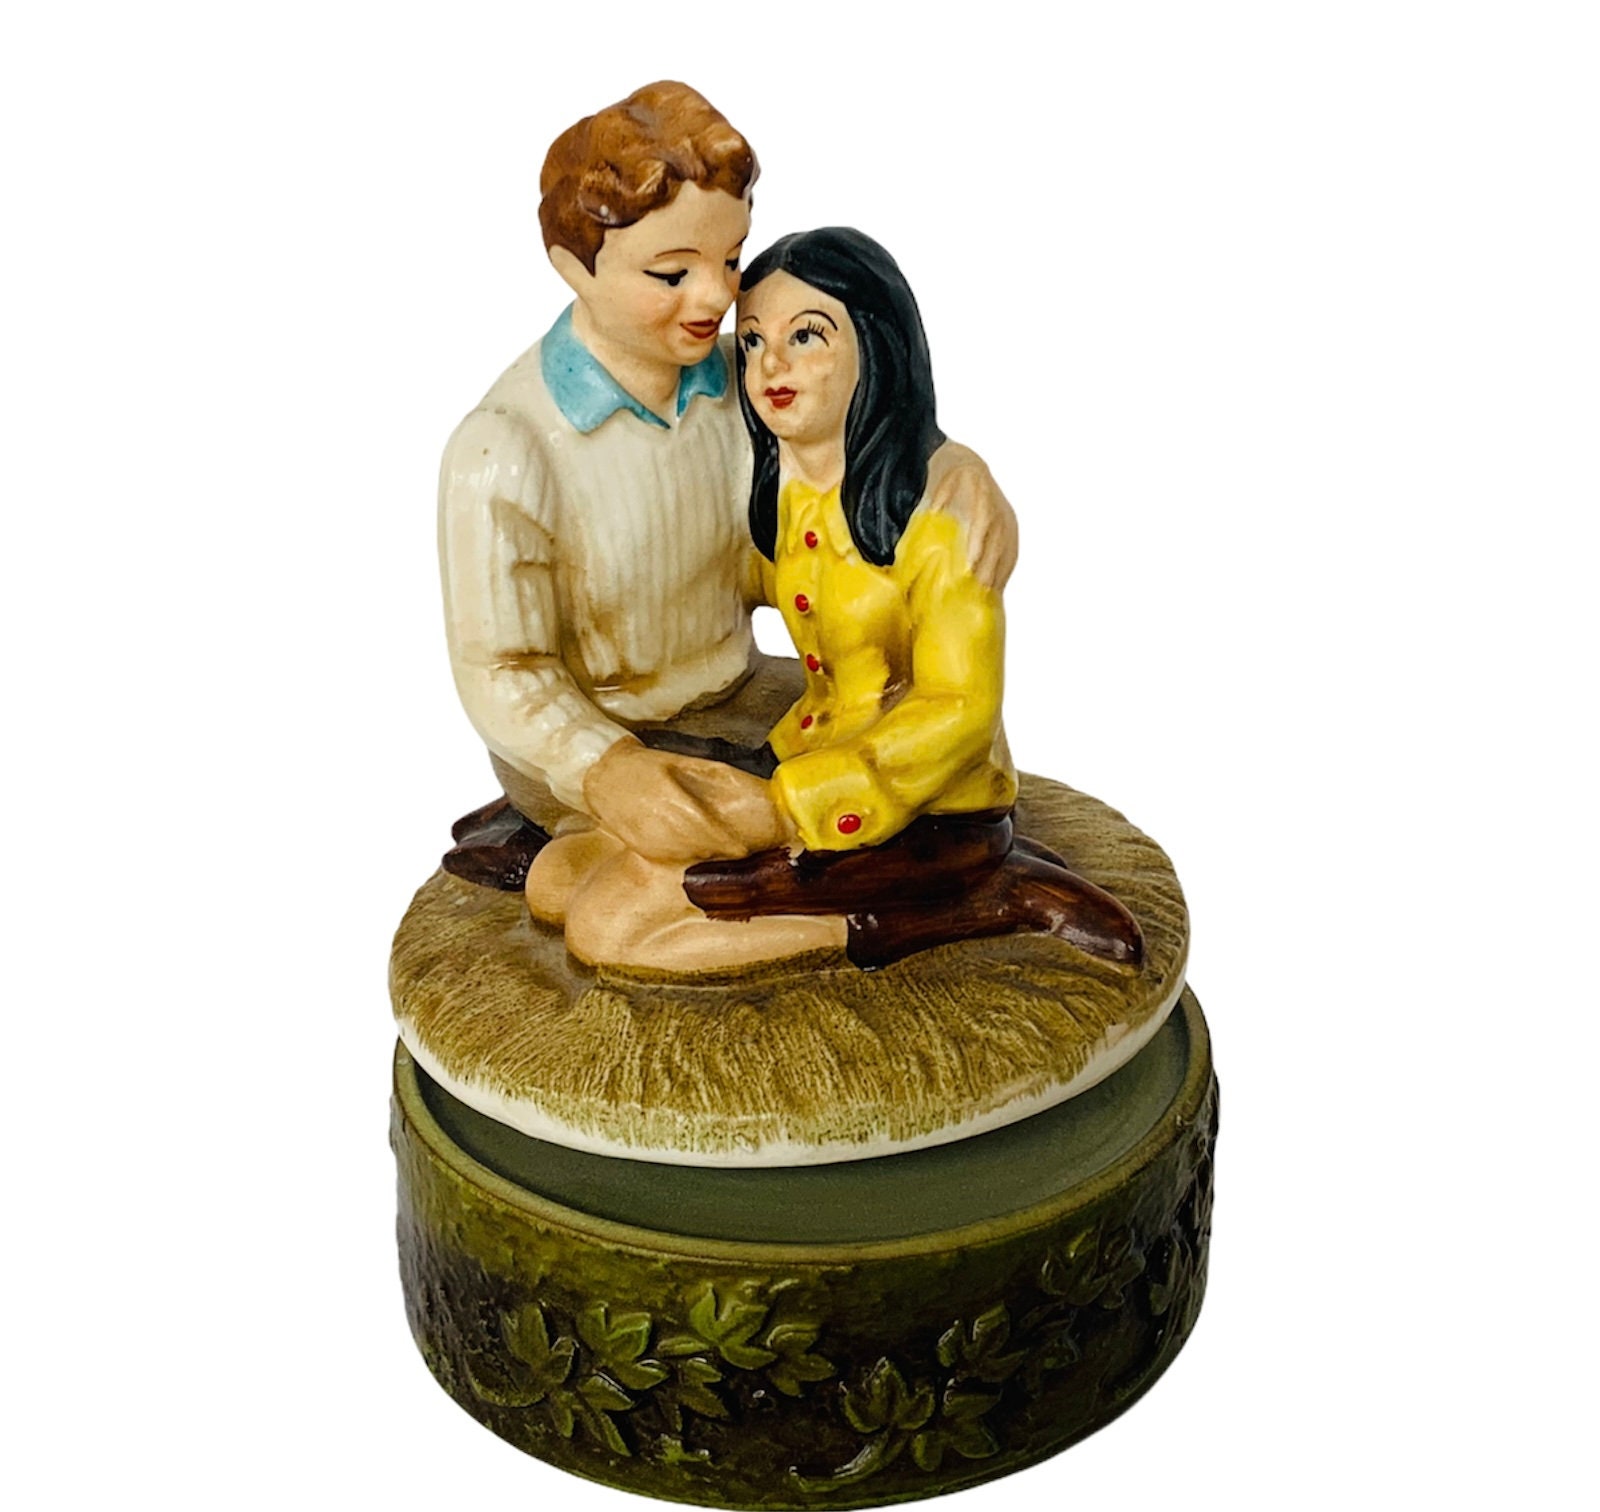 Vintage Music Box Japan 1950s picnic love couple figurine moving rotating musical working sculpture ceramic art gift